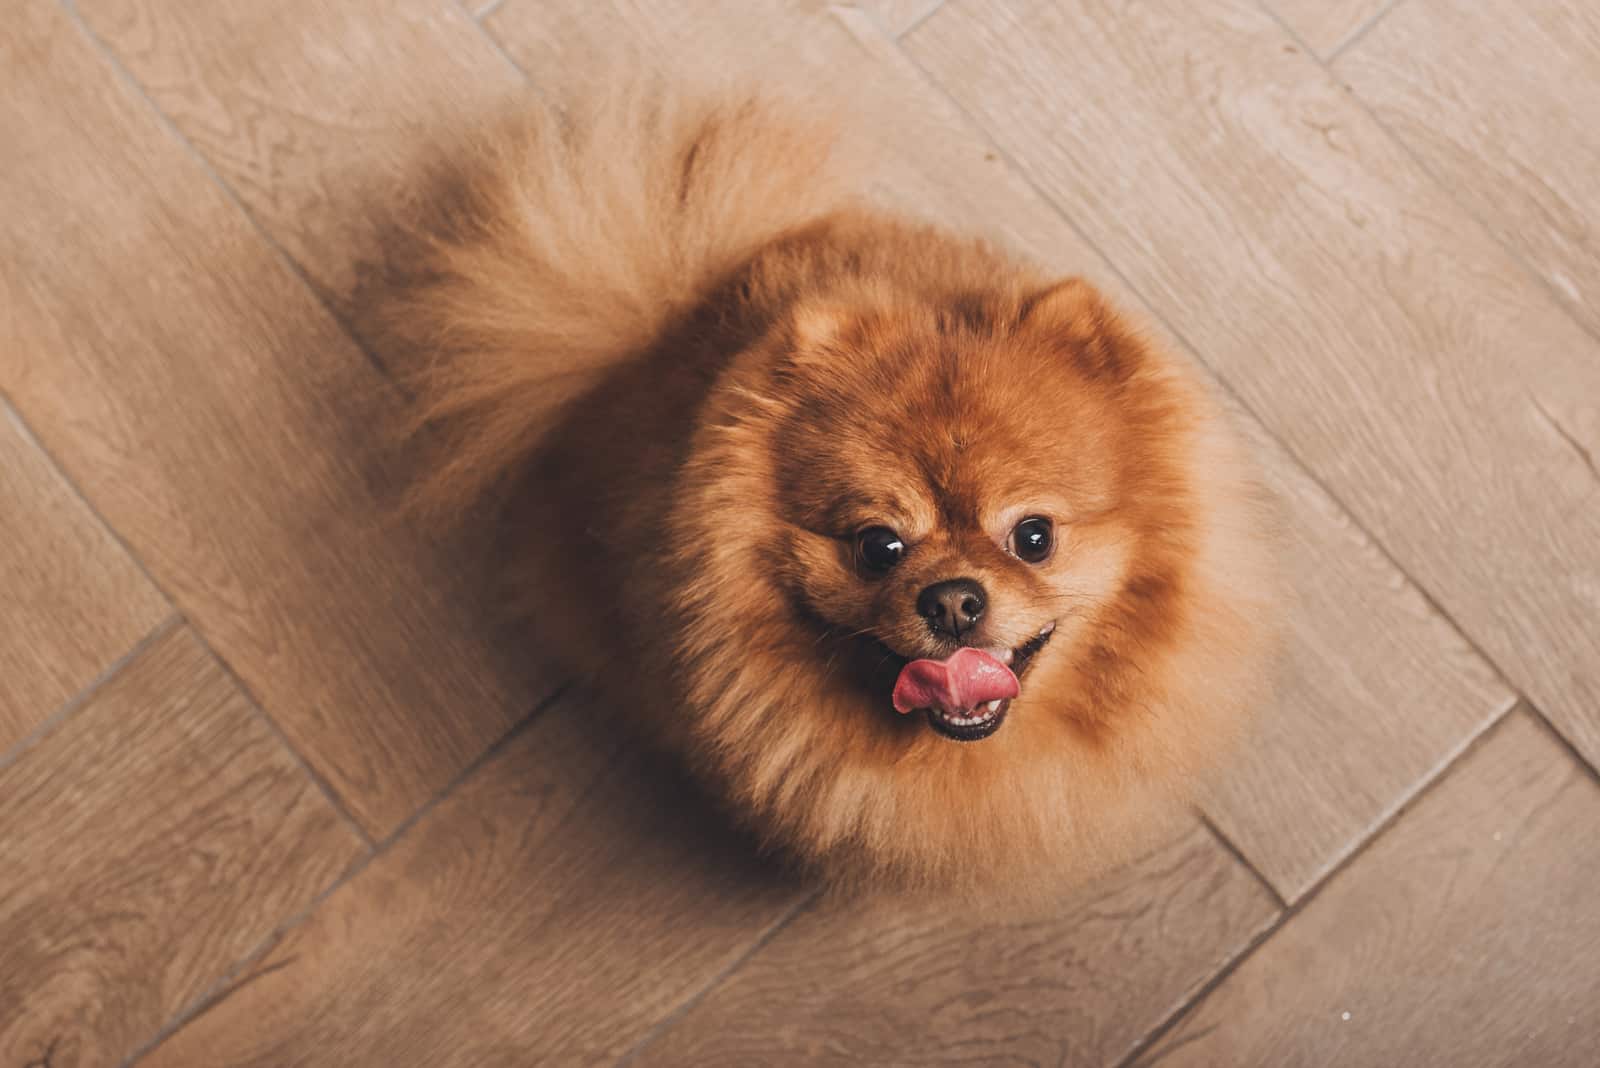 Pomeranian sitting on wooden floor with tongue out